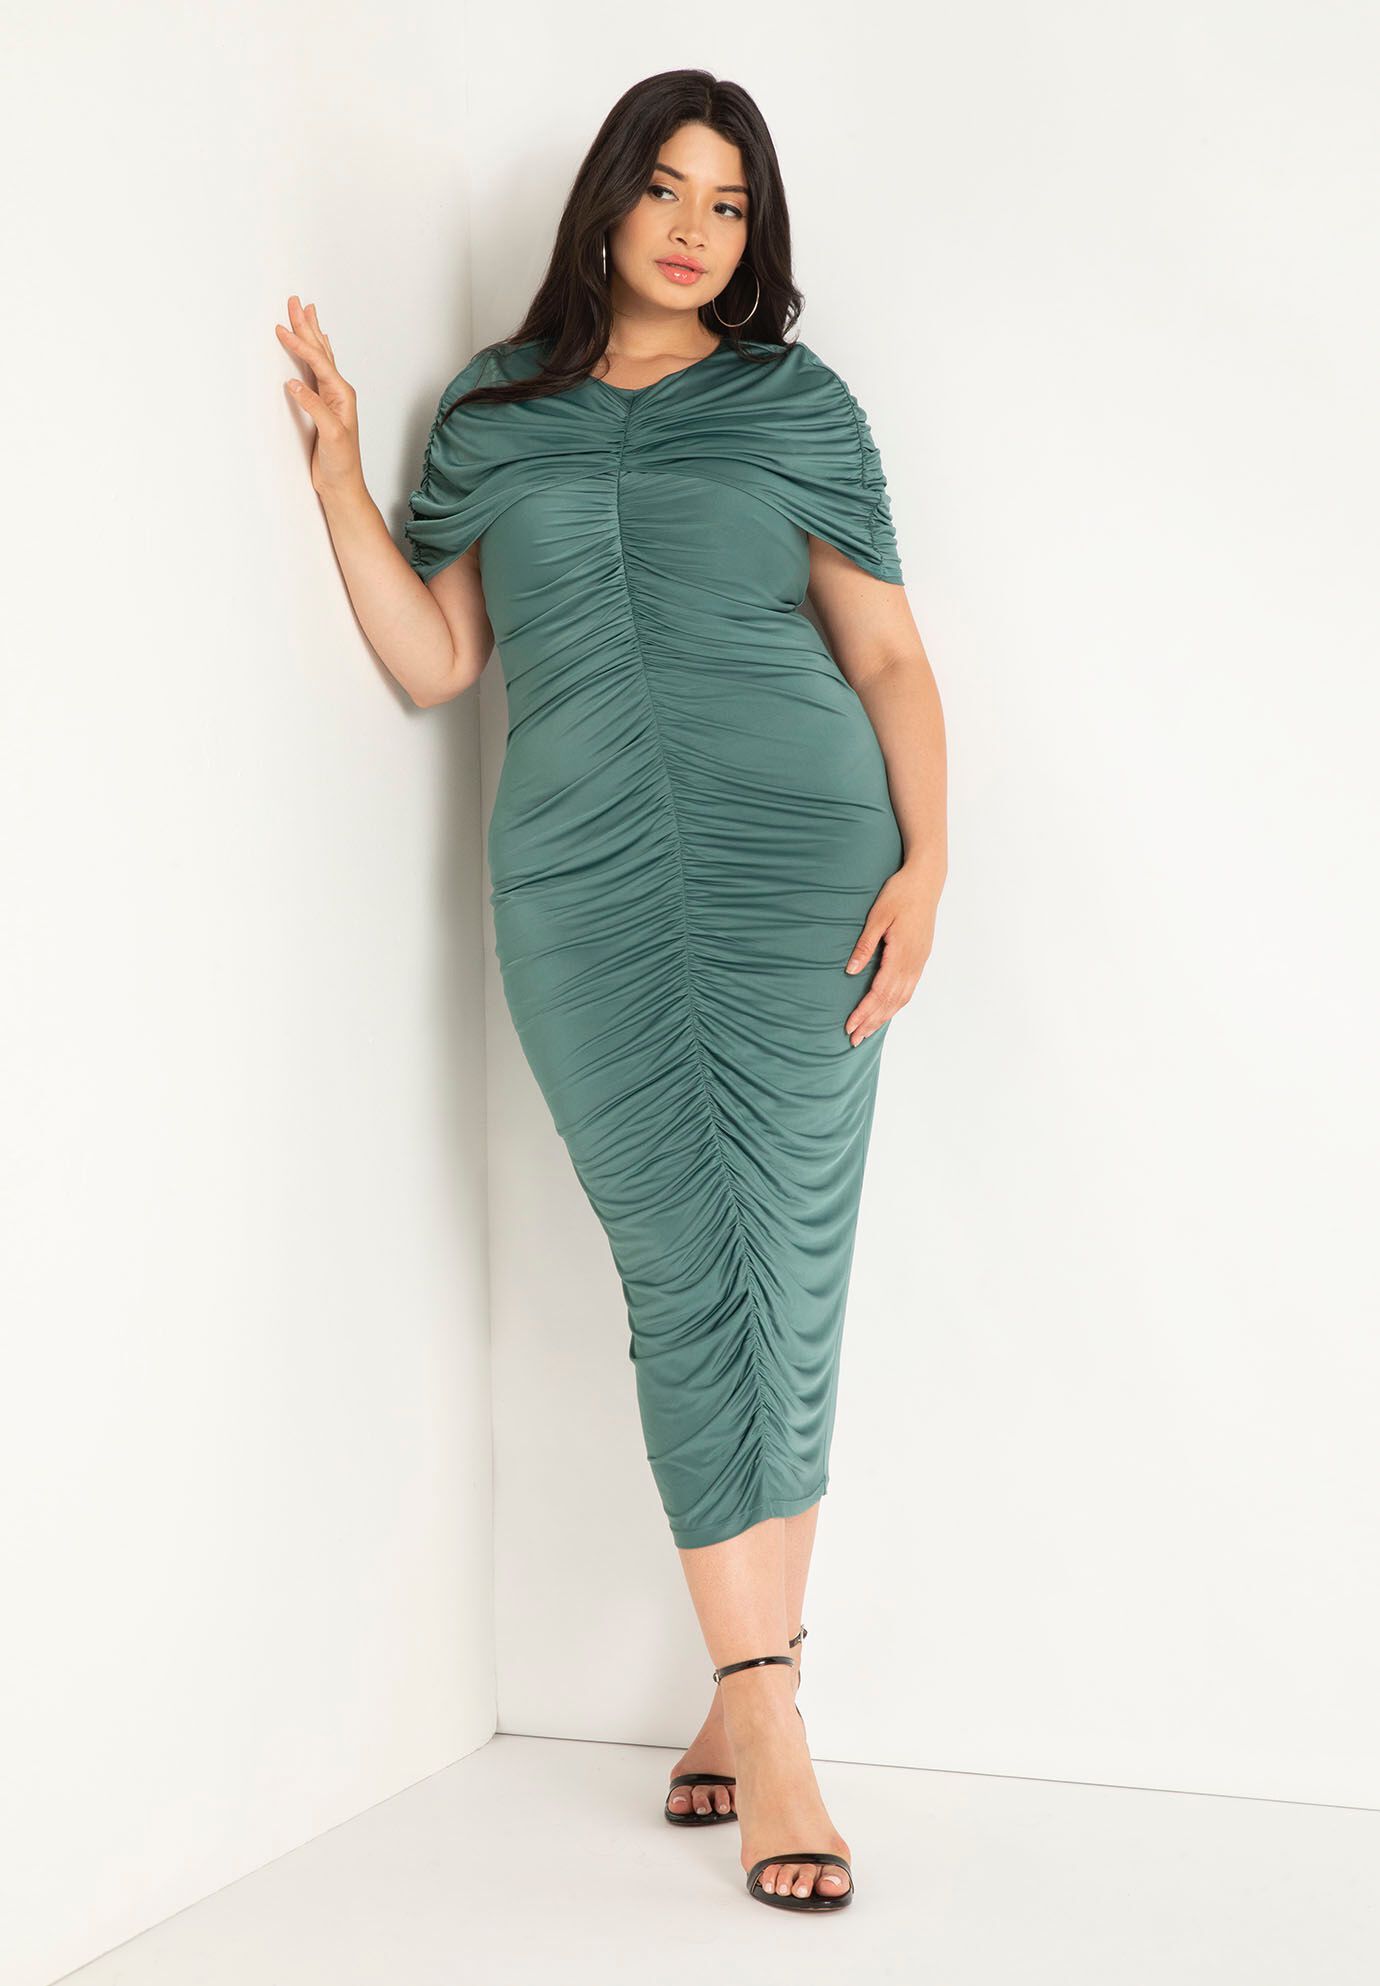 Shirred Ruched Bodycon Dress by Eloquii